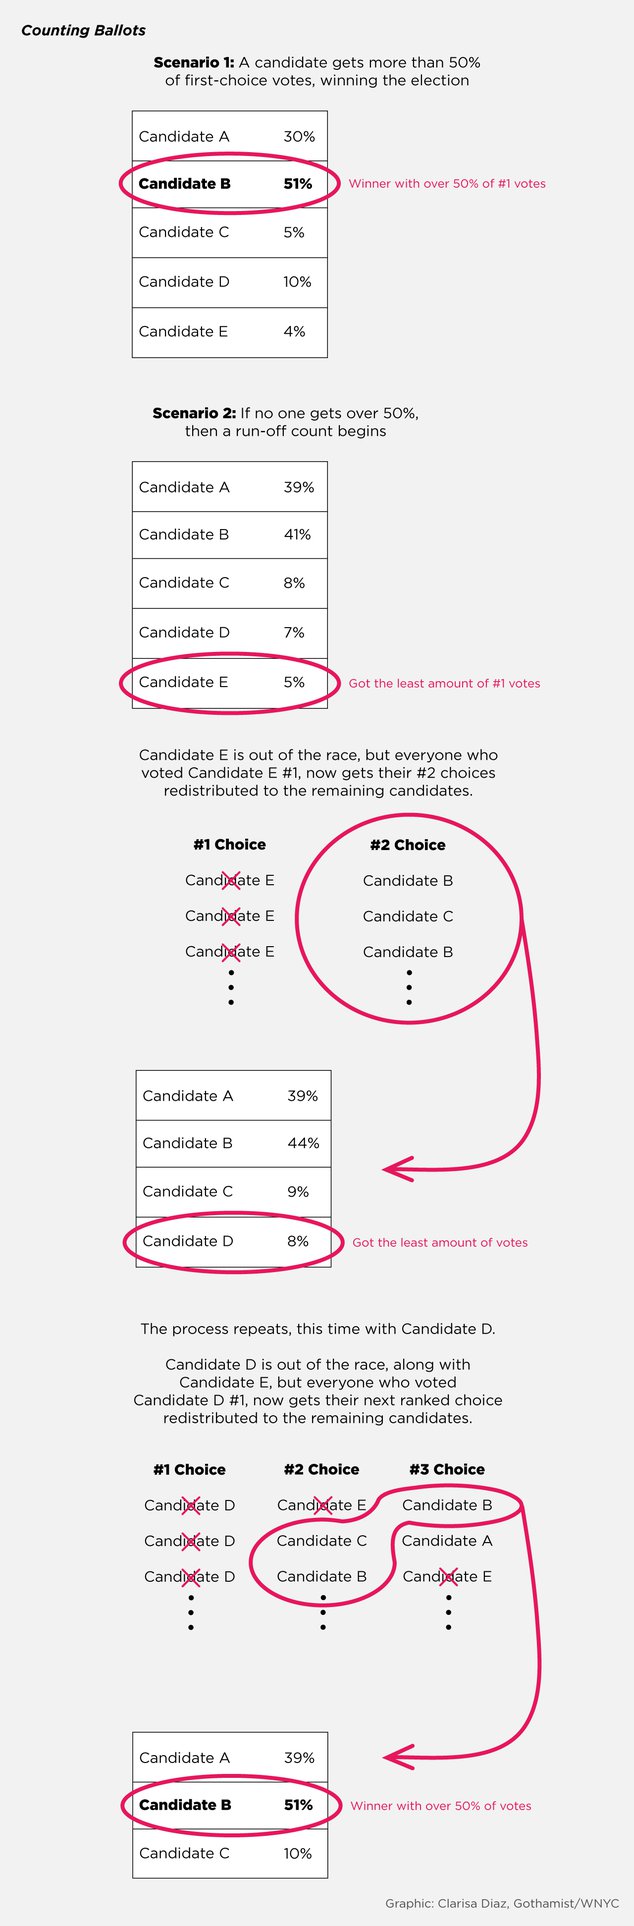 Scenario 1: A candidate gets more than 50% of first-choice votes, winning the election  (Candidate B:  51% - Winner with over 50% of #1 votes)  Scenario 2: If no one gets over 50%, then a run-off count begins  (Candidate E: 5% - Got the least amount of #1 votes)  Candidate E is out of the race, but everyone who voted Candidate E #1, now gets their #2 choices redistributed to the remaining candidates.  (#1 Choices of Candidate E, #2 Choices circled to redistribute. Candidate D: 8% - Got the least amount of votes)  The process repeats, this time with Candidate D.  Candidate D is out of the race, along with Candidate E, but everyone who voted Candidate D #1, now gets their next ranked choice redistributed to the remaining candidates.  (#1 Choices of Candidate D, Next Ranked Choices circled to redistribute. Candidate B: 51% - Winner with over 50% of votes)